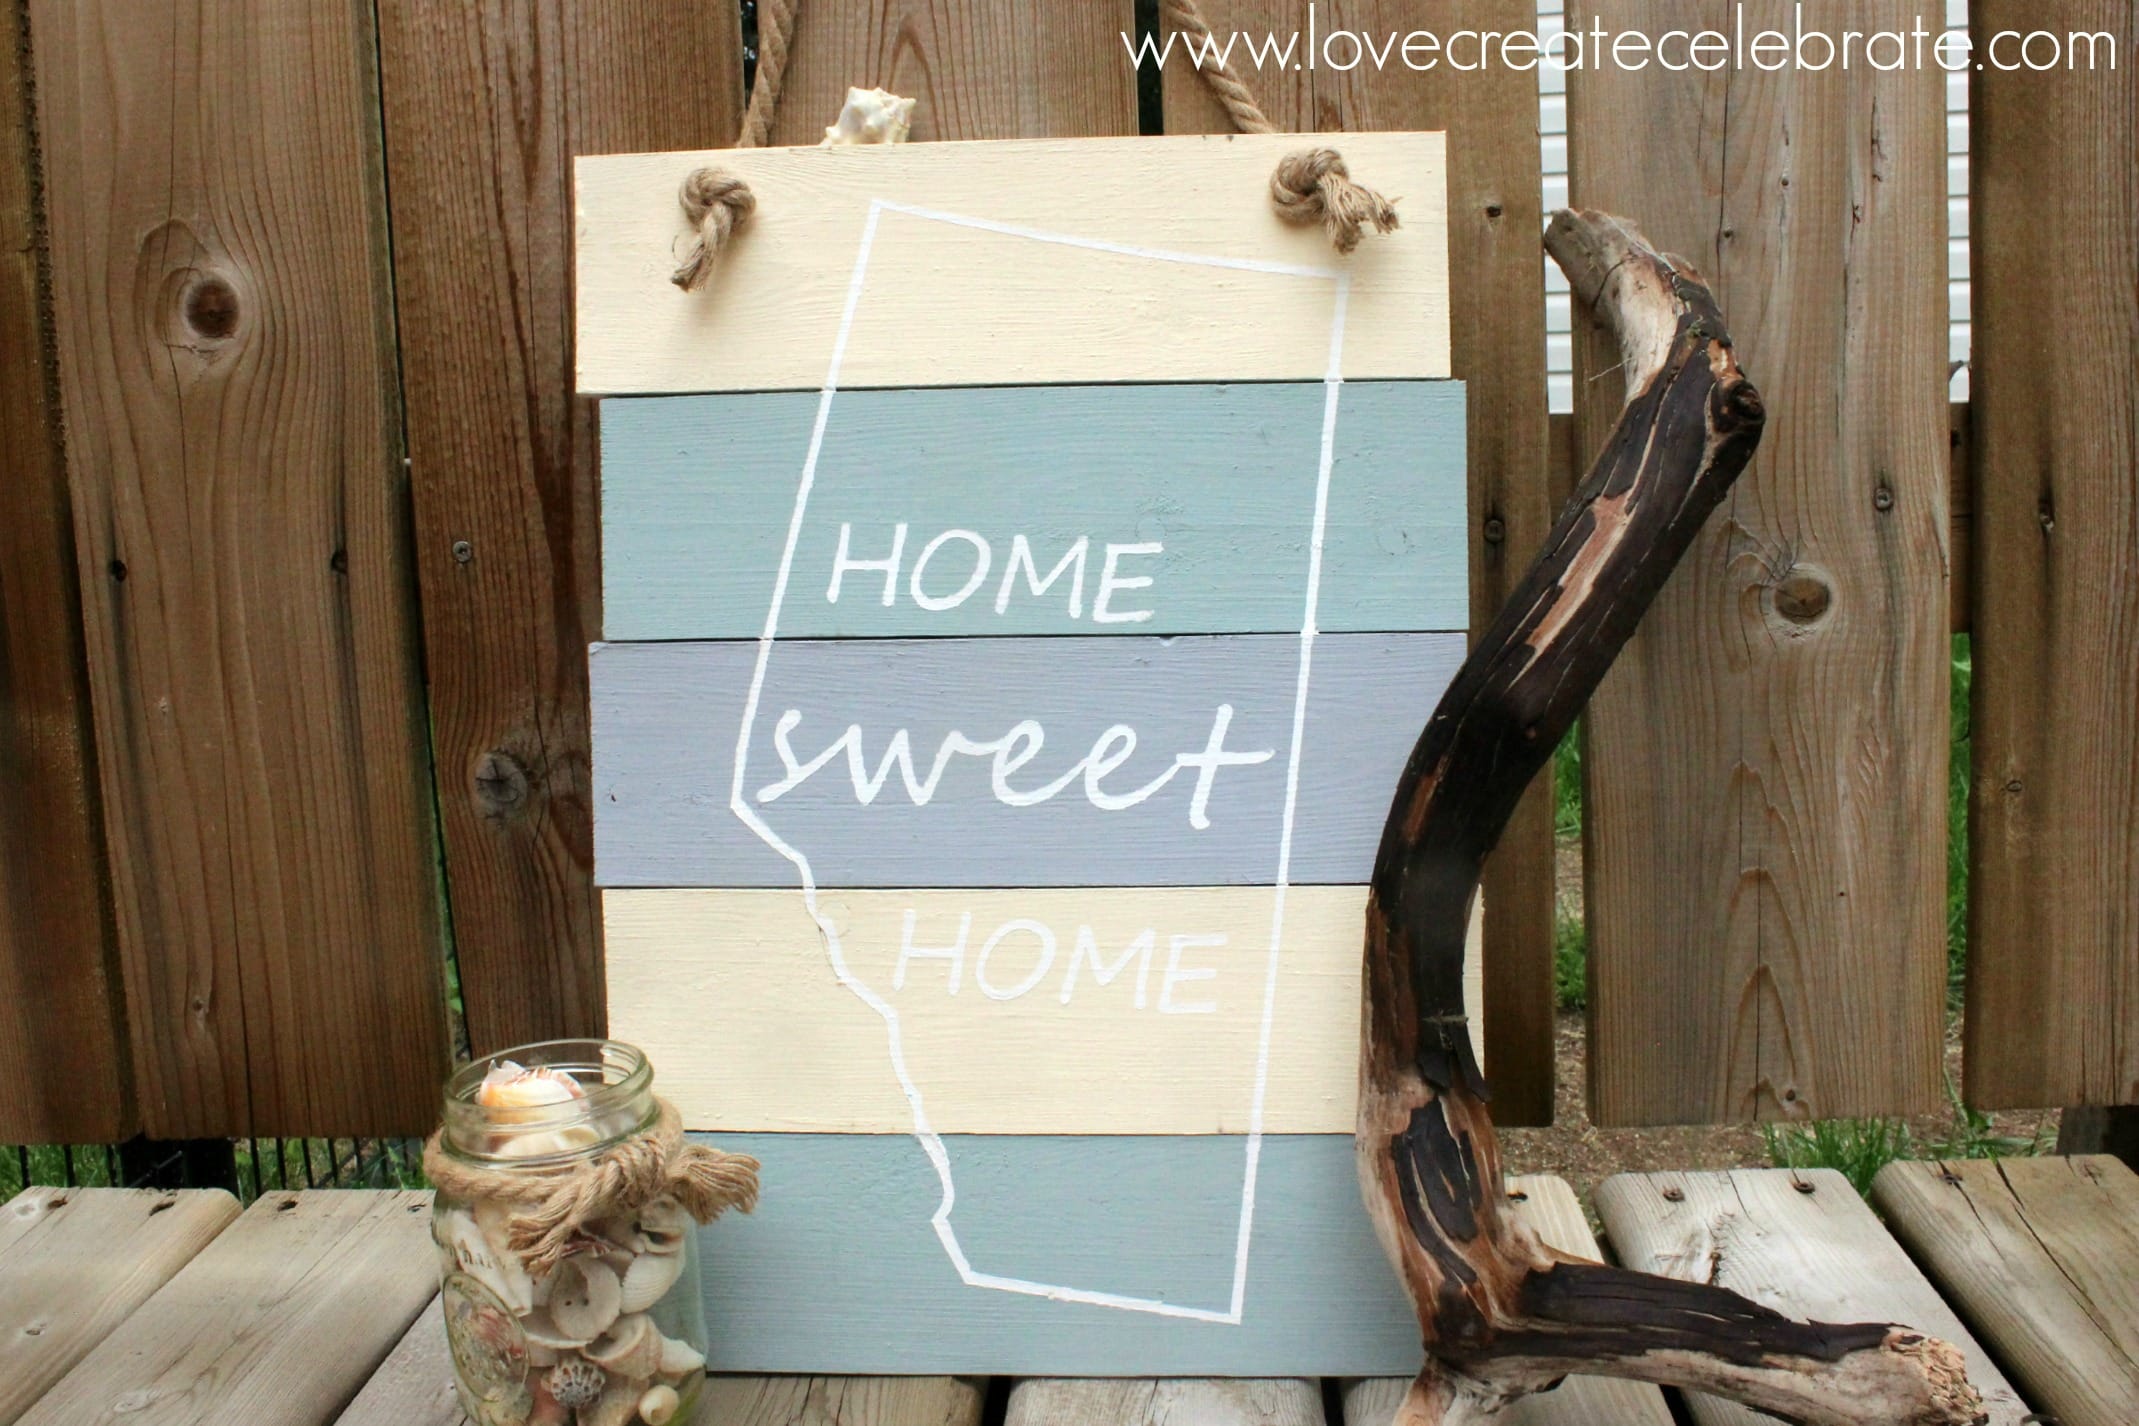 Home Sweet Home Details about   Hand painted wood wall hanging 